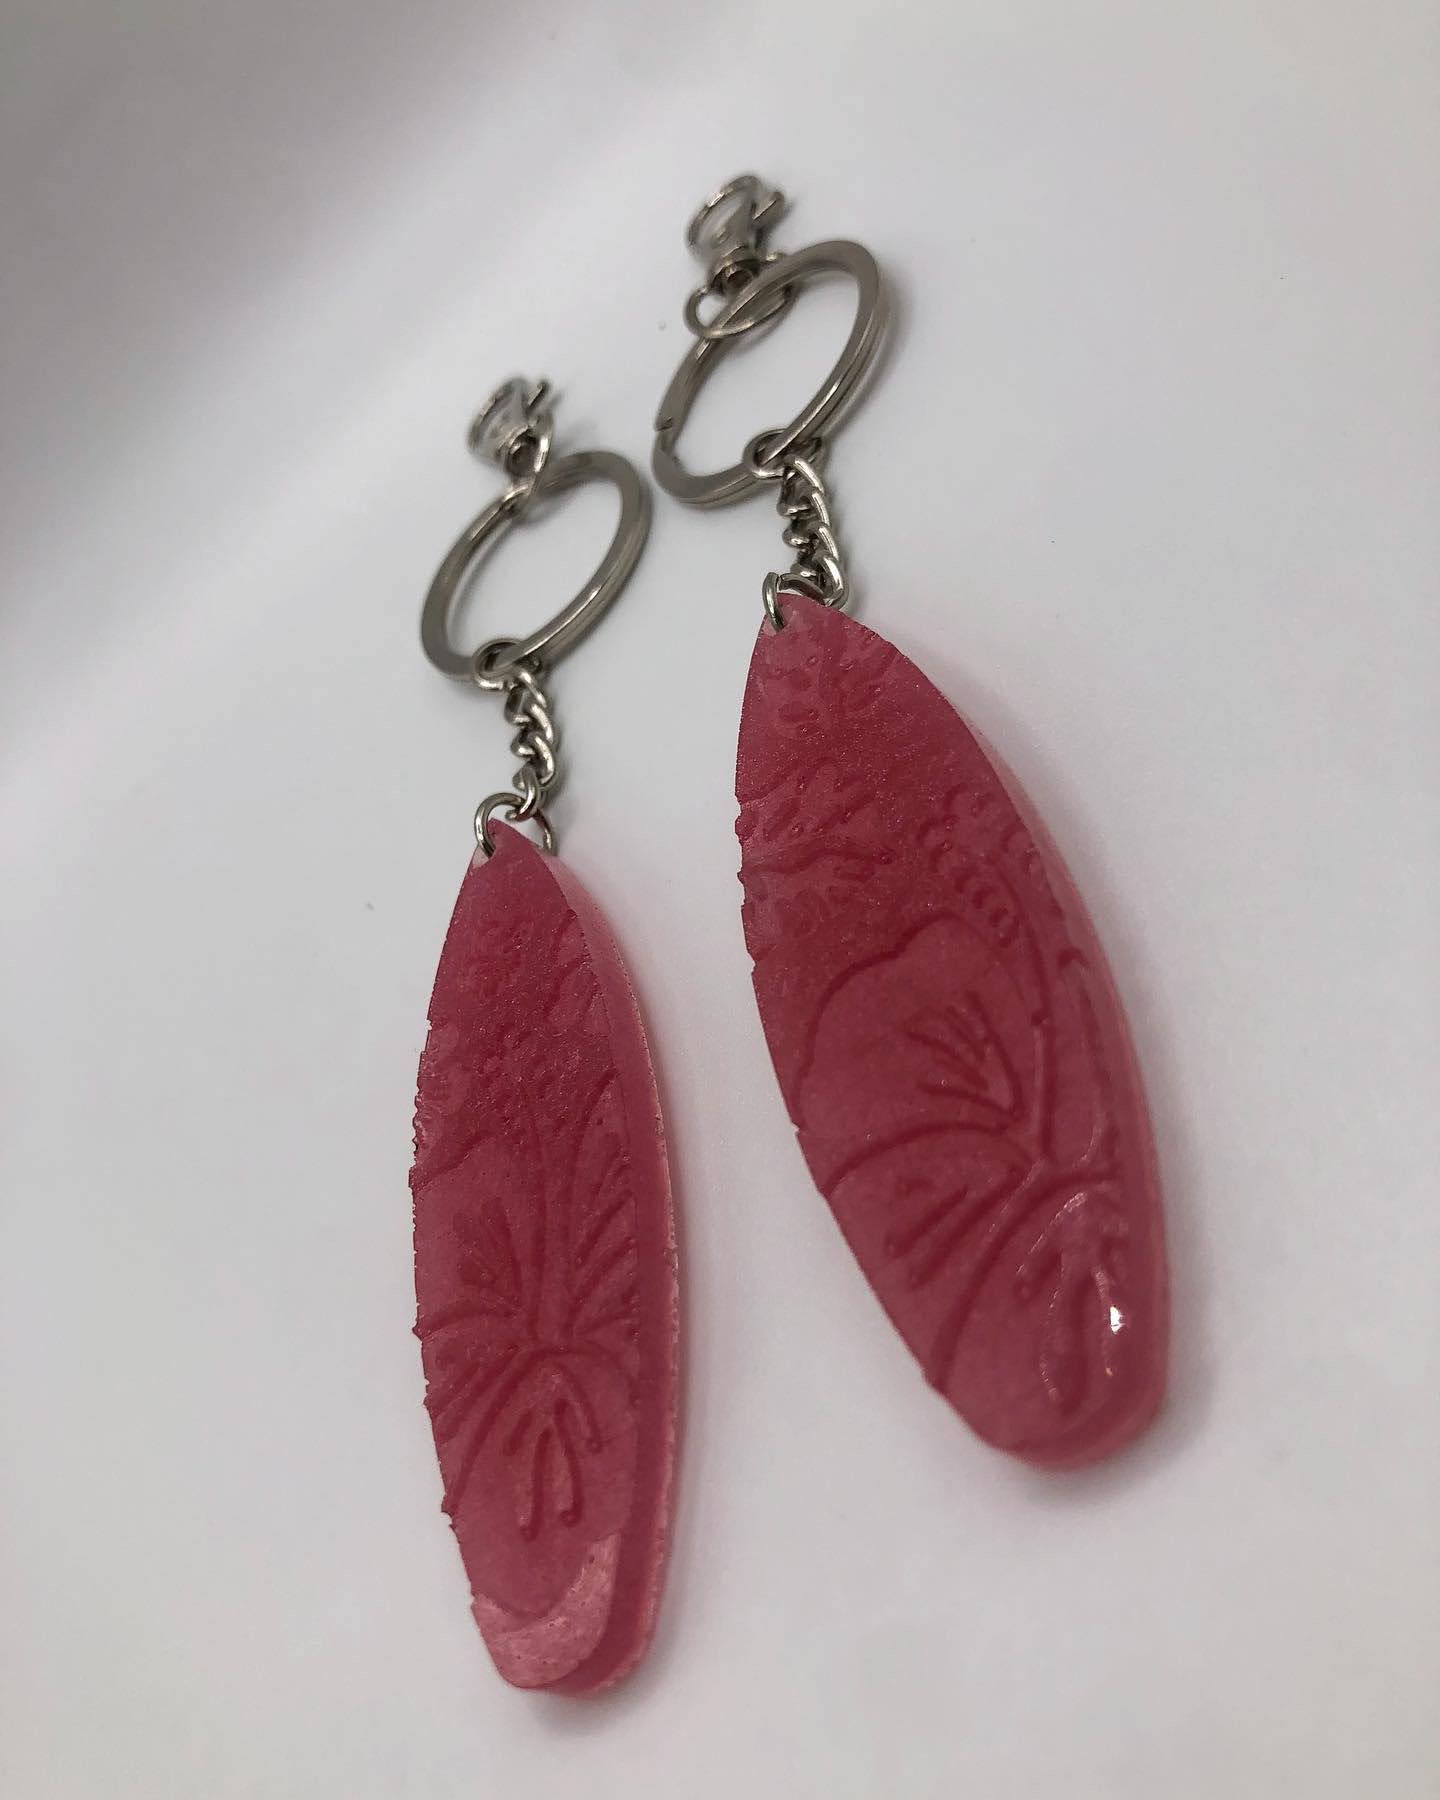 Hibiscus Surfboard Keychain with Snap Hook